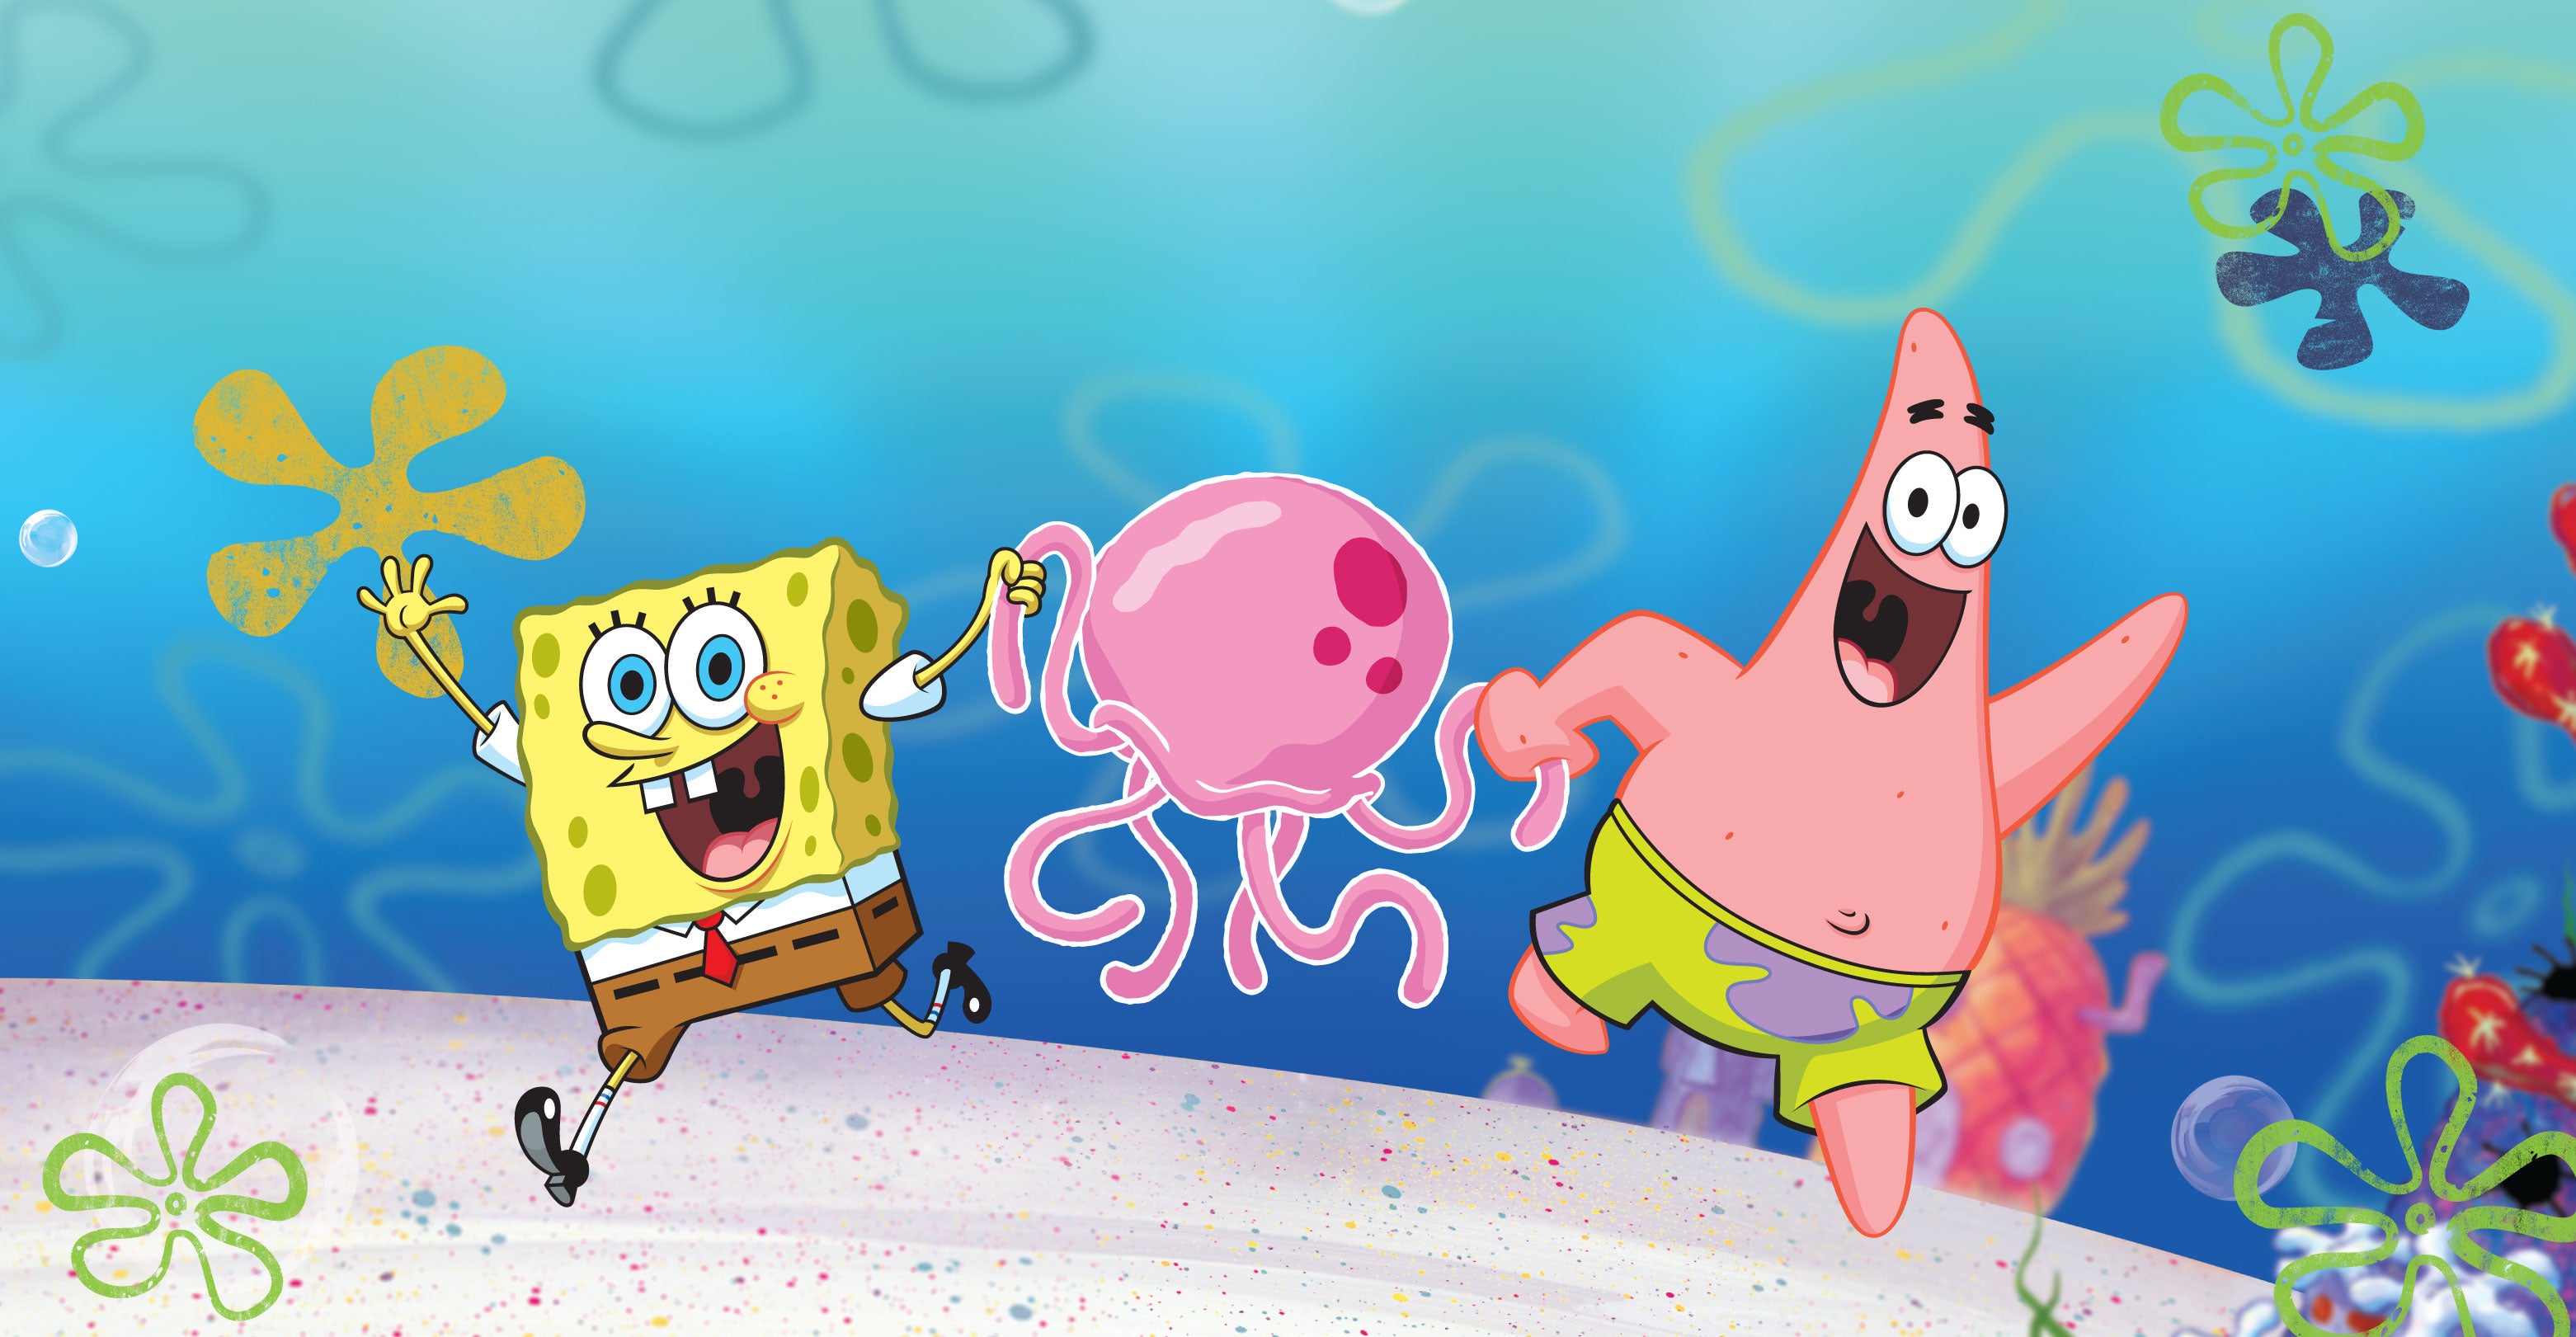 Are you ready? SpongeBob SquarePants is here! – Conscious Step